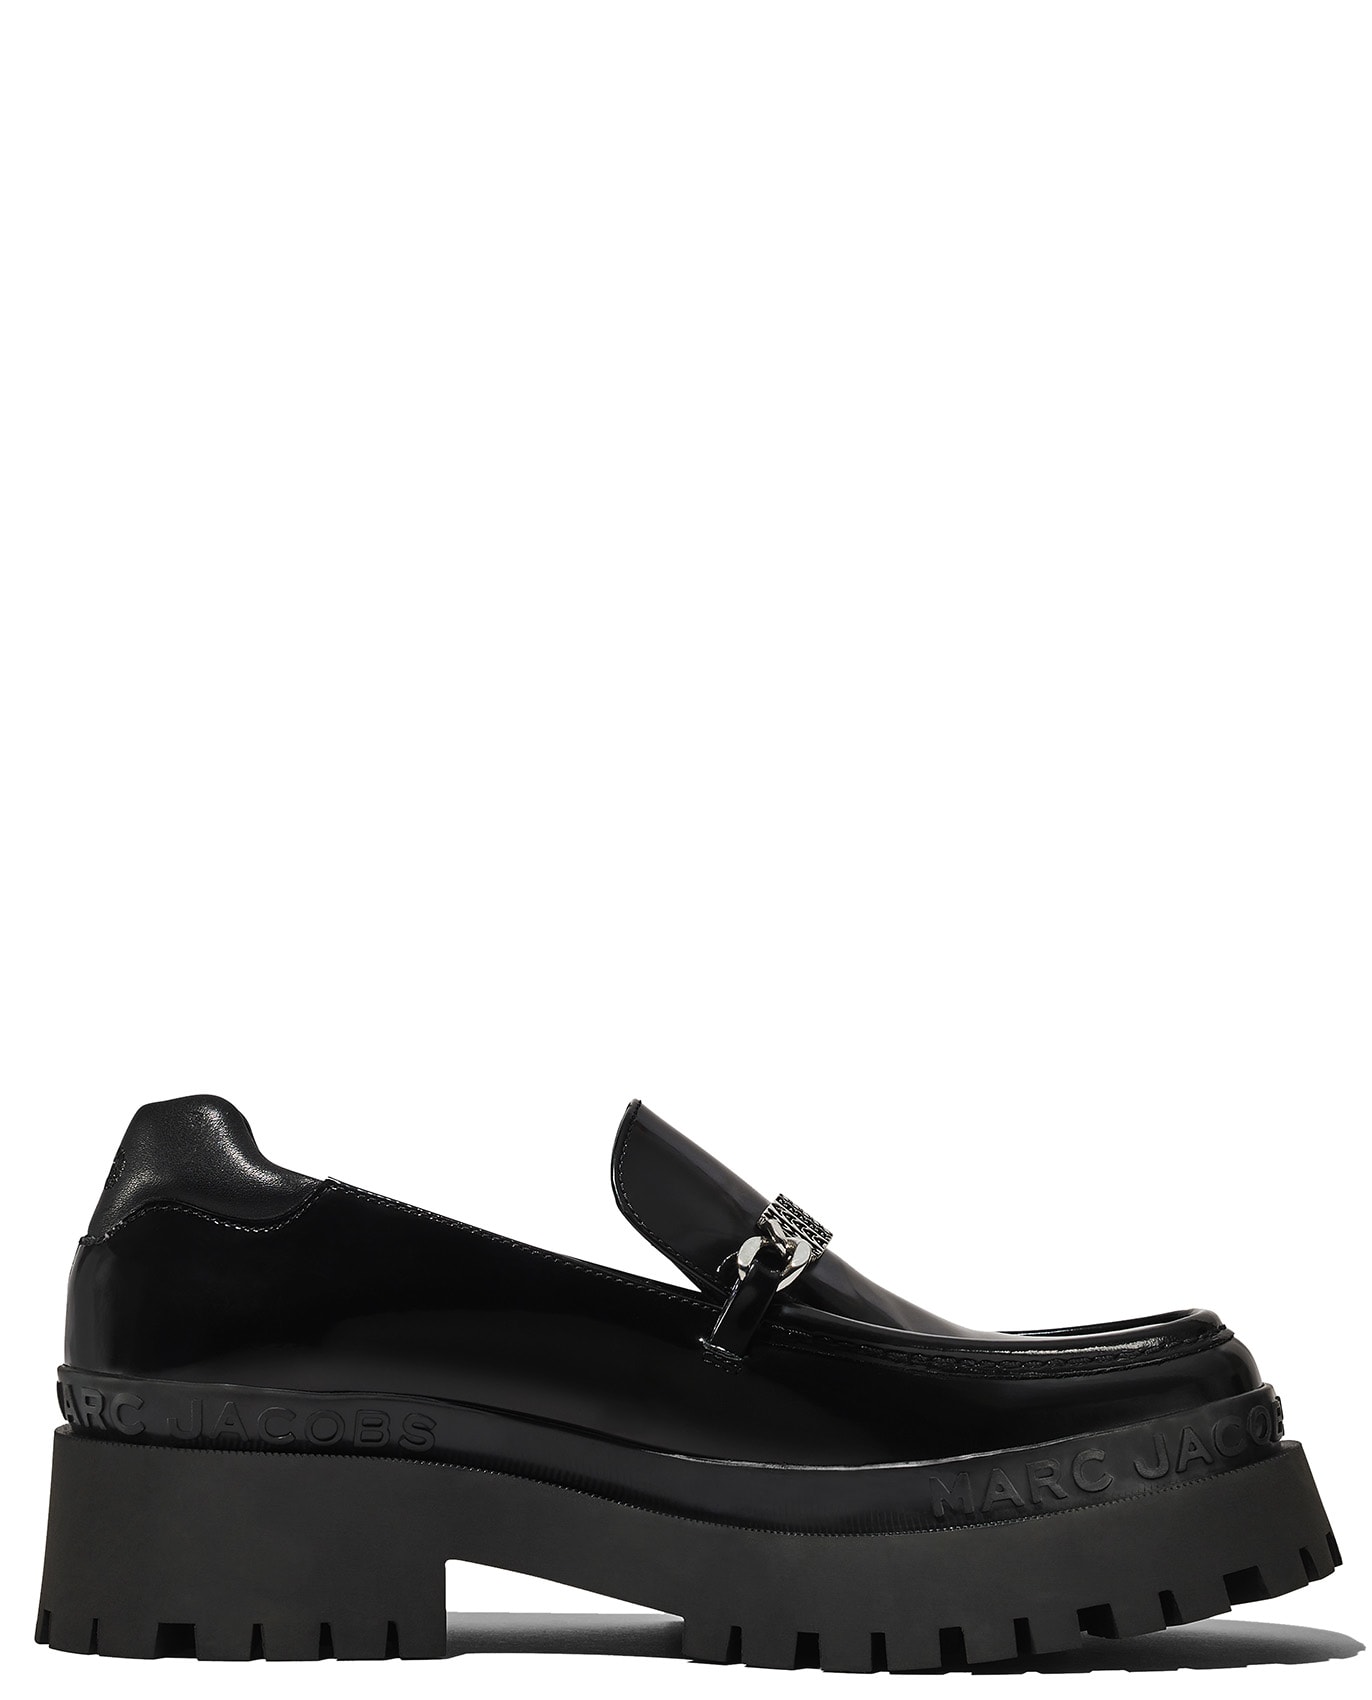 MARC JACOBS MARC JACOBS BLACK BARCODE MONOGRAM LOAFERS